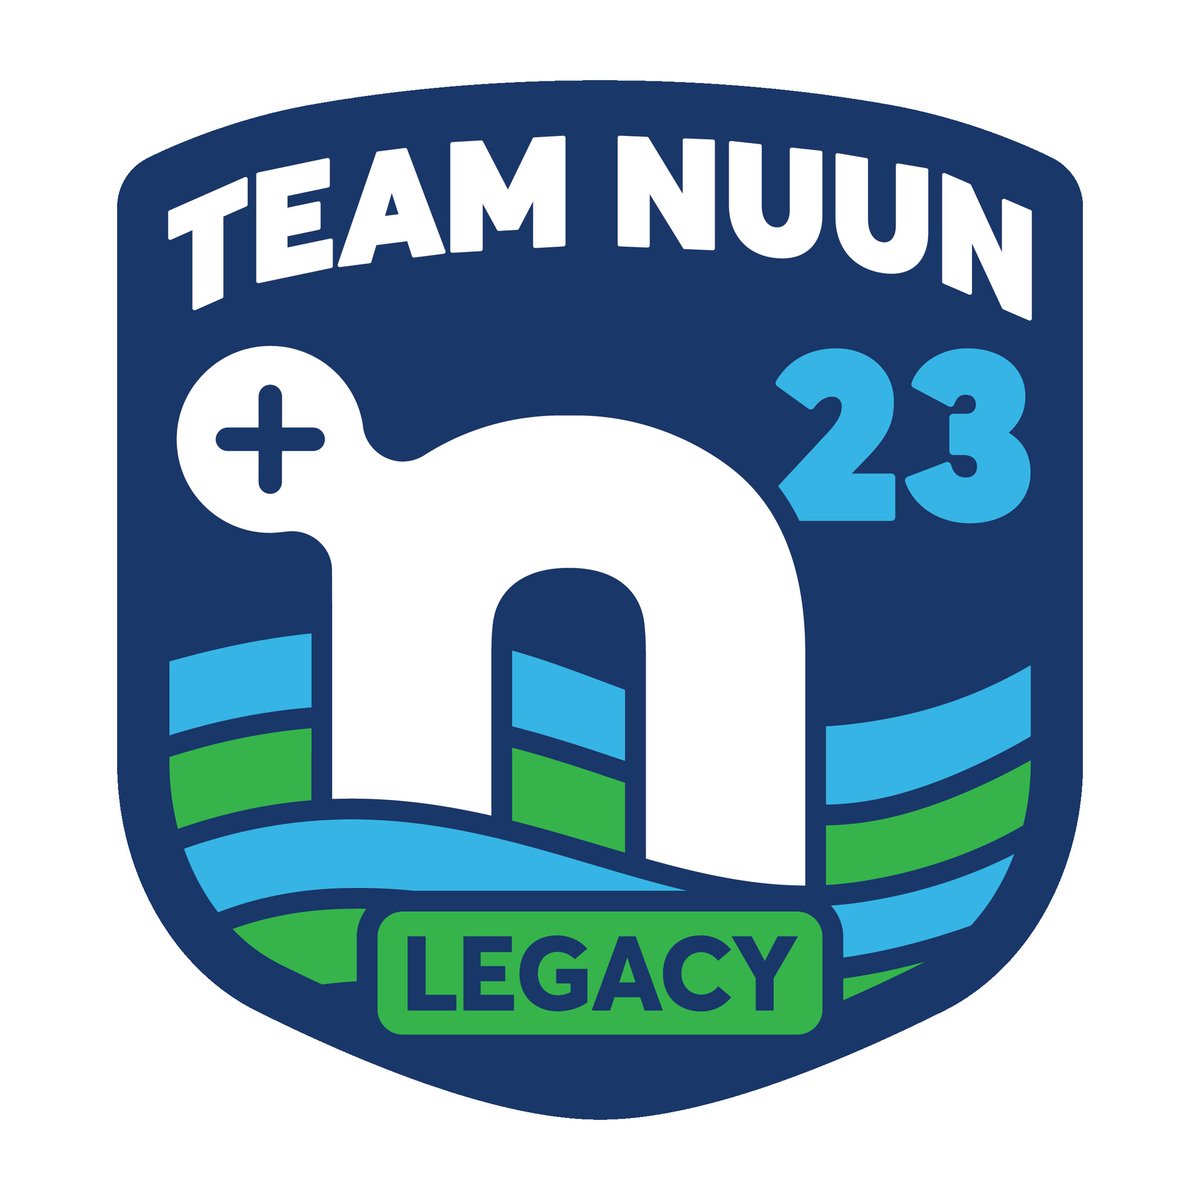 Honored to serve as a #nuunambassador for the 5th year and to be a part of #legacyteamnuun2023 ! #nuunlife #nuunlove